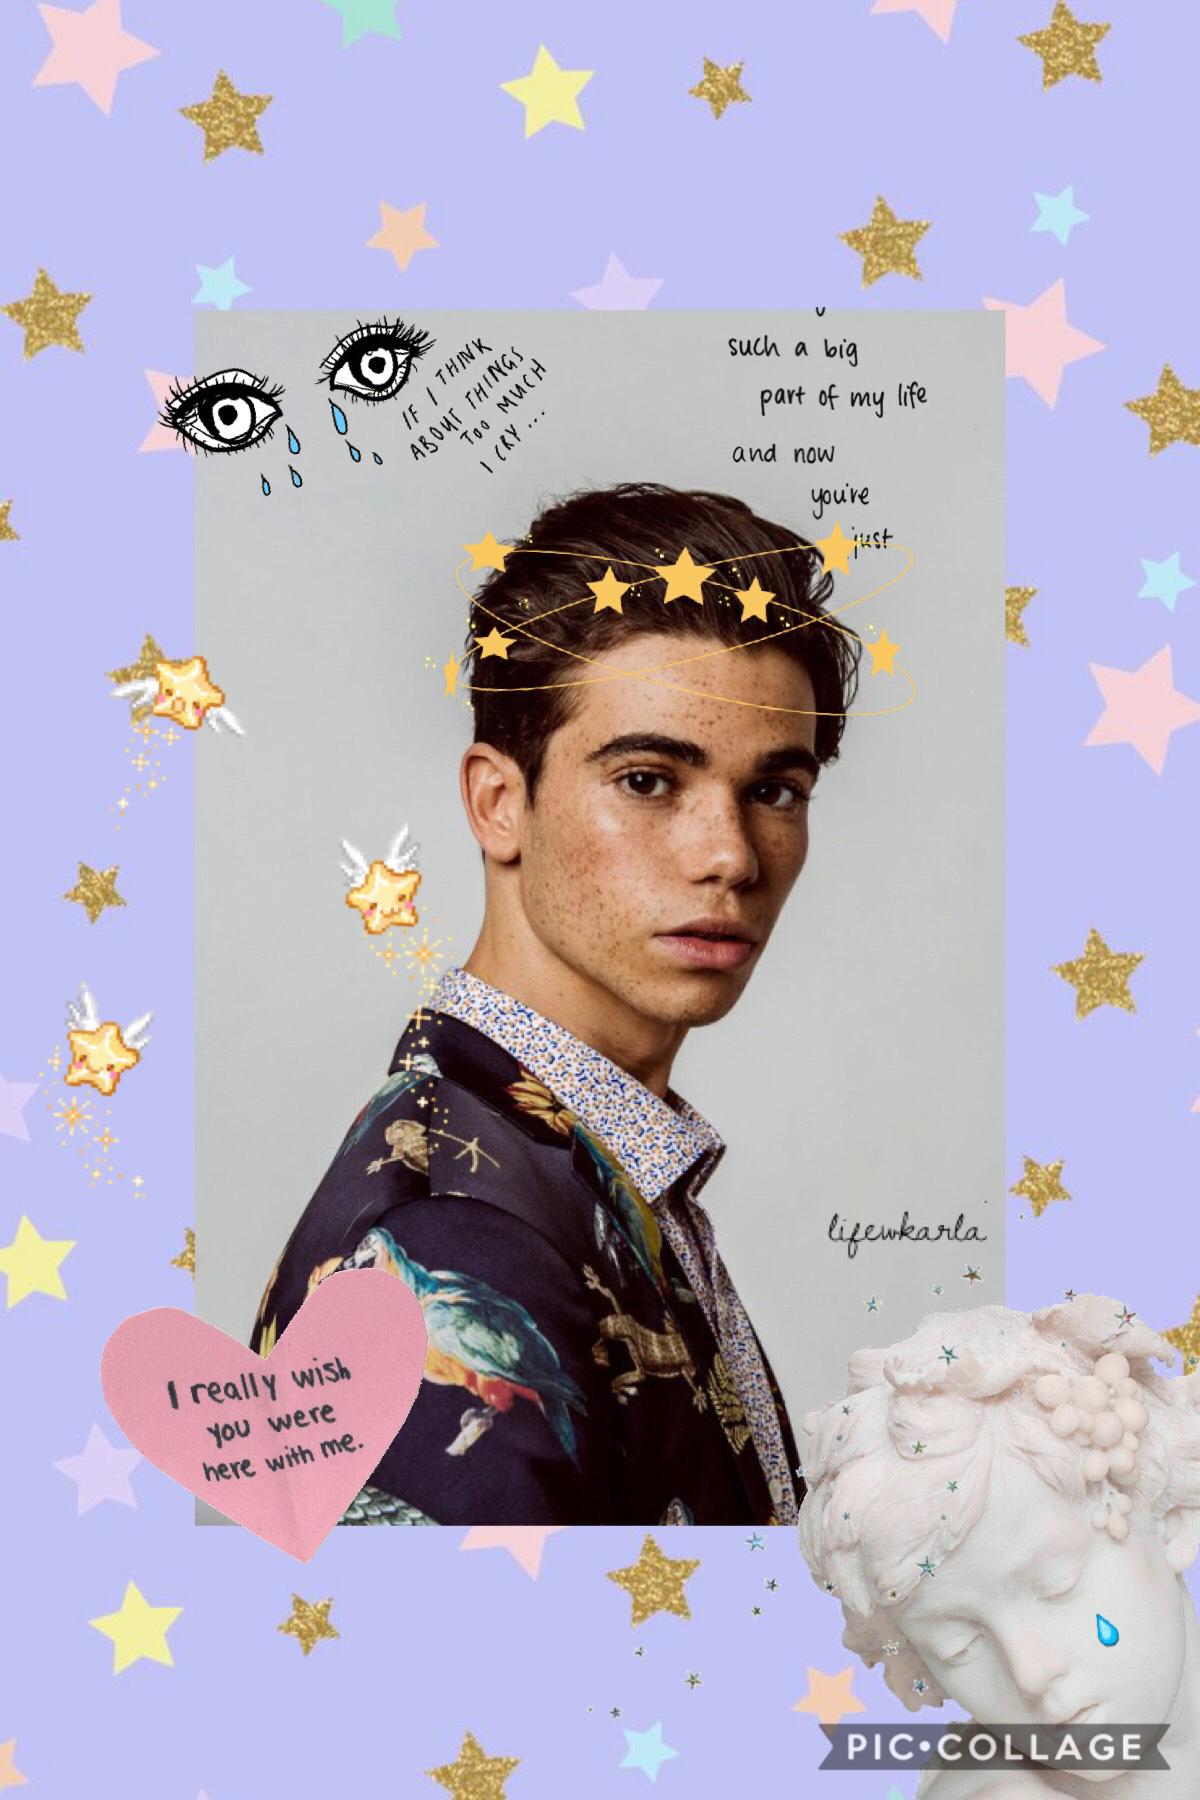 ❤️ RIP to Cameron Boyce ❤️
Such an amazing soul, died too soon . This is a tribute to him. Much love and prayers going out for his family 🤧
Q: Whats your favorite show? 